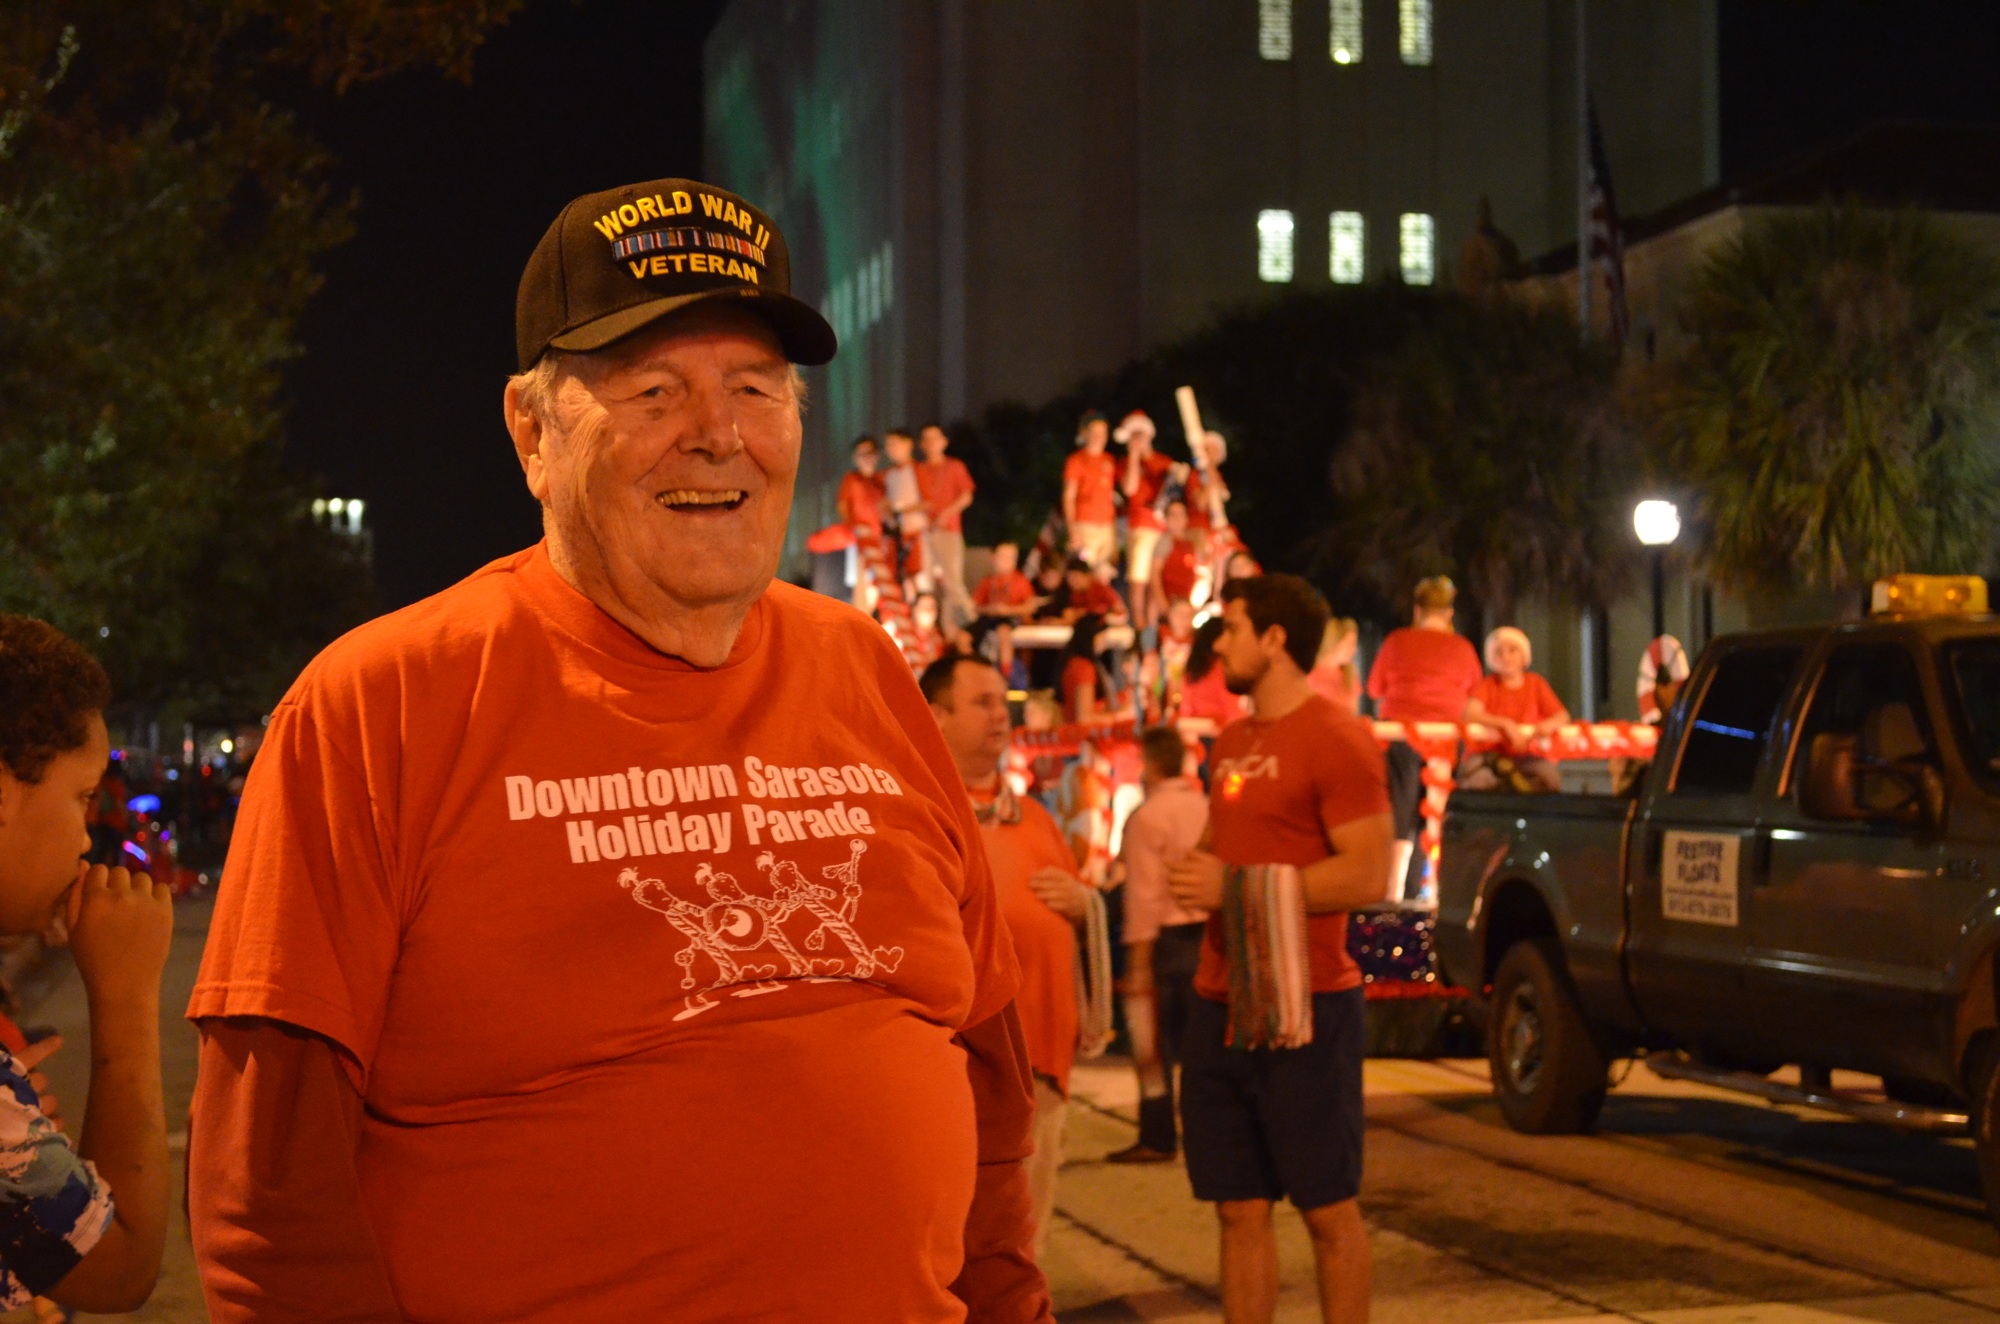 Thorpe watches as the floats make their way down Main Street during the 20th annual  Downtown Sarasota Holiday Parade.